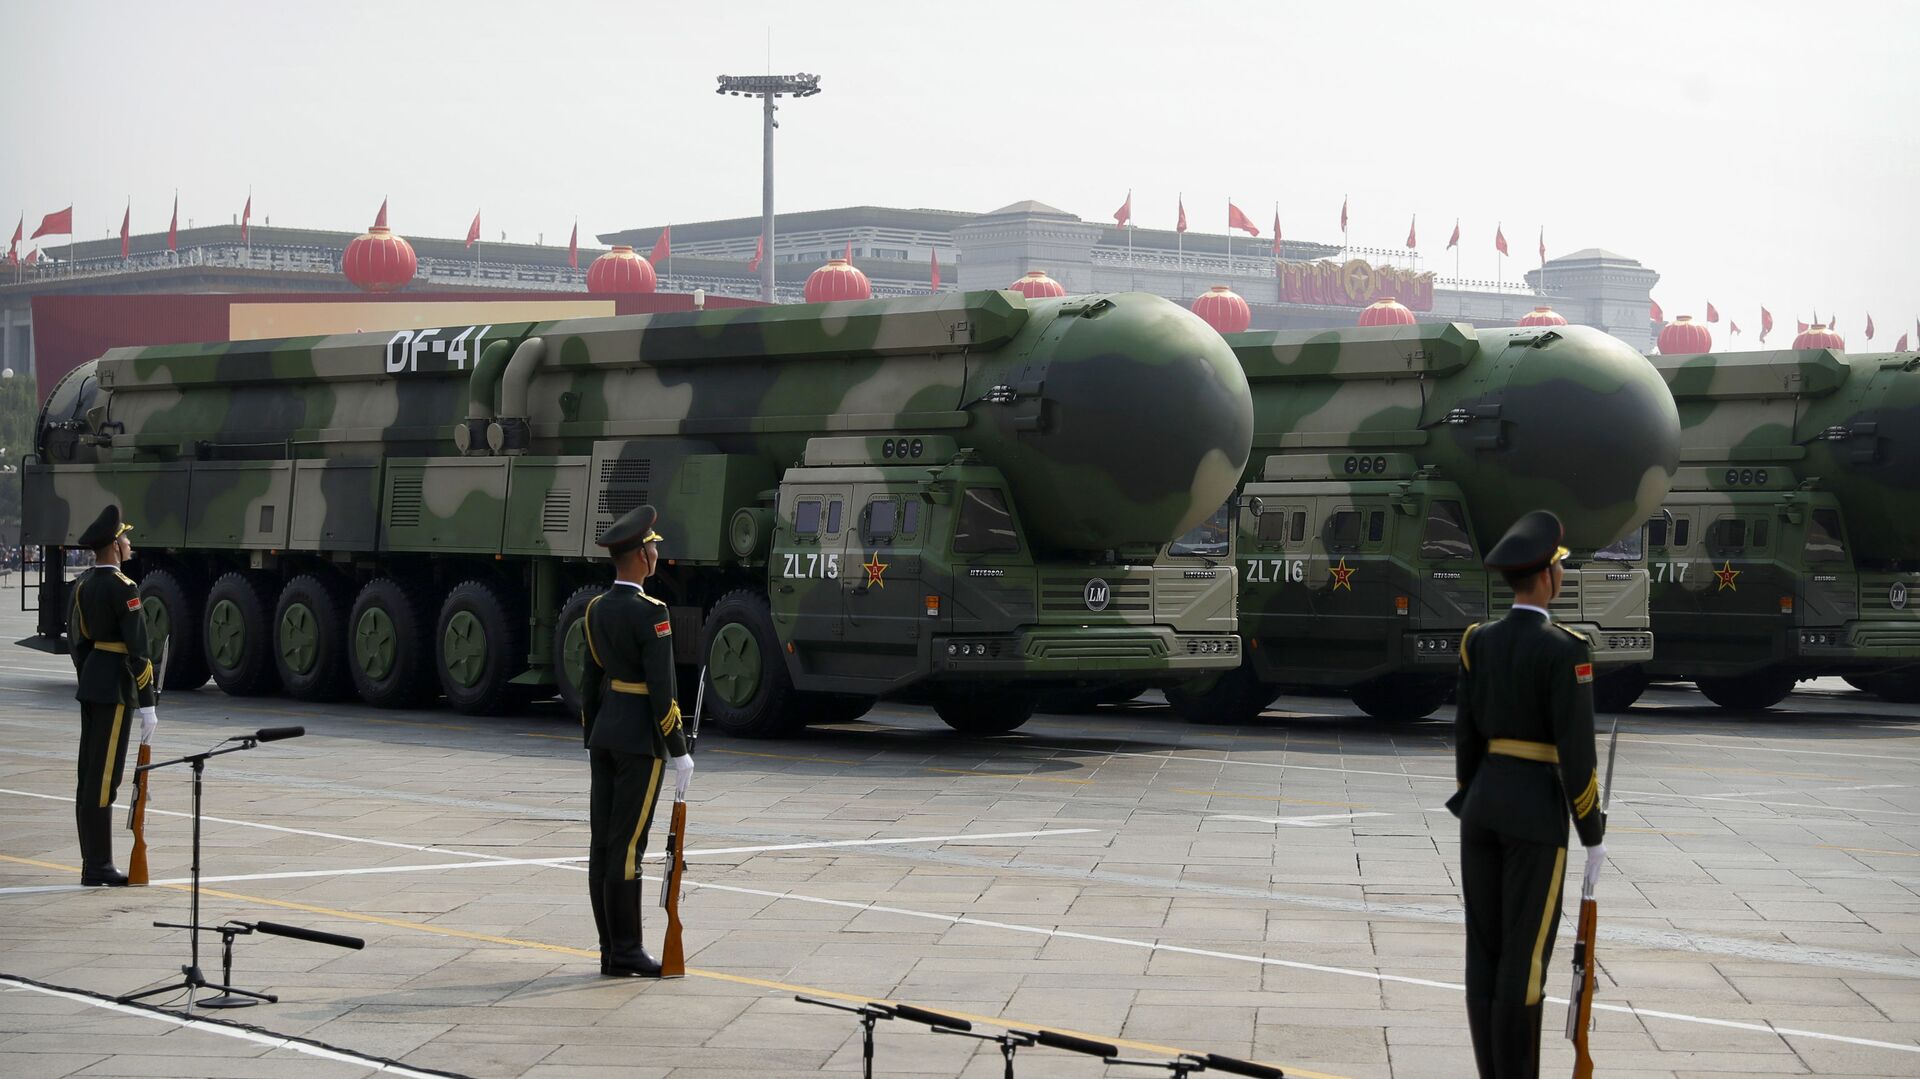 Chinese military vehicles carrying DF-41 ballistic missiles roll during a parade to commemorate the 70th anniversary of the founding of Communist China in Beijing, Tuesday, Oct. 1, 2019 - Sputnik International, 1920, 31.07.2022